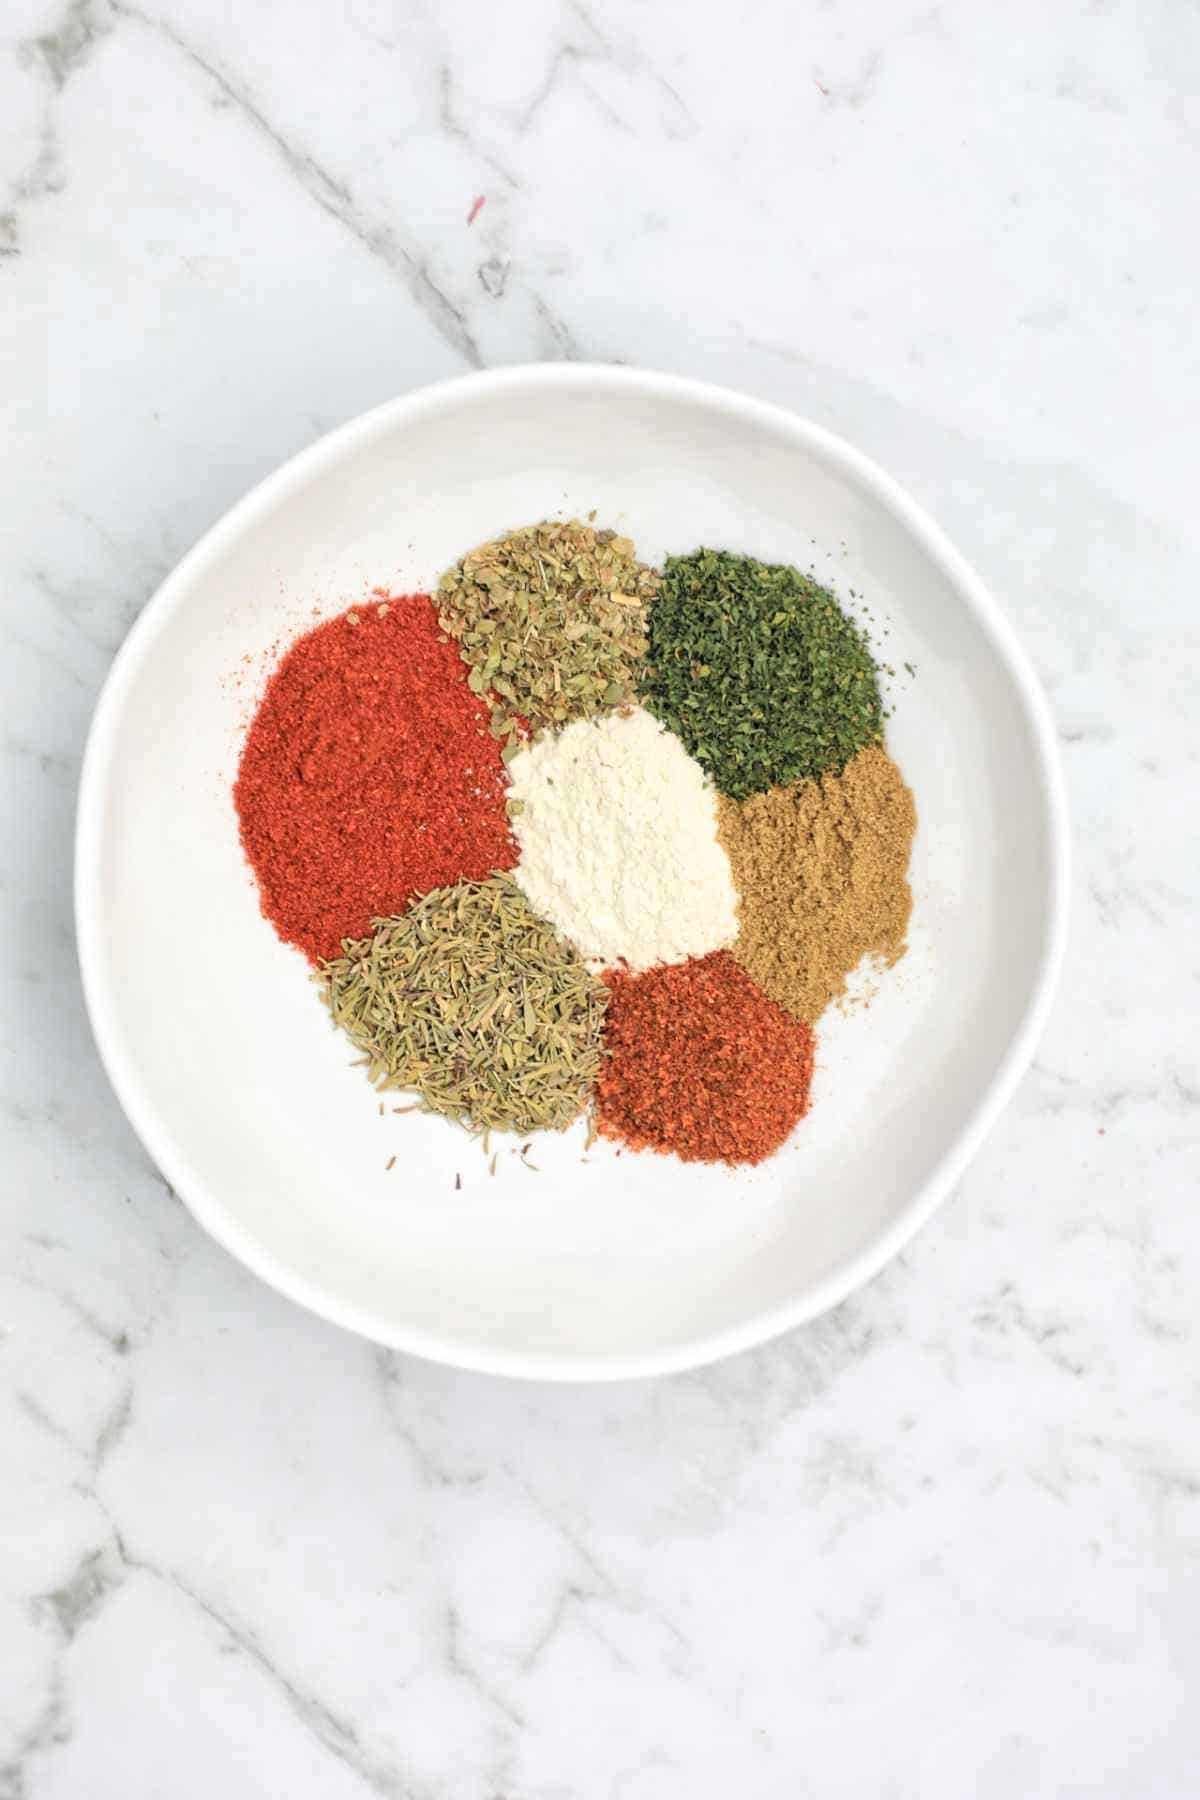 herbs and spices in a small bowl.